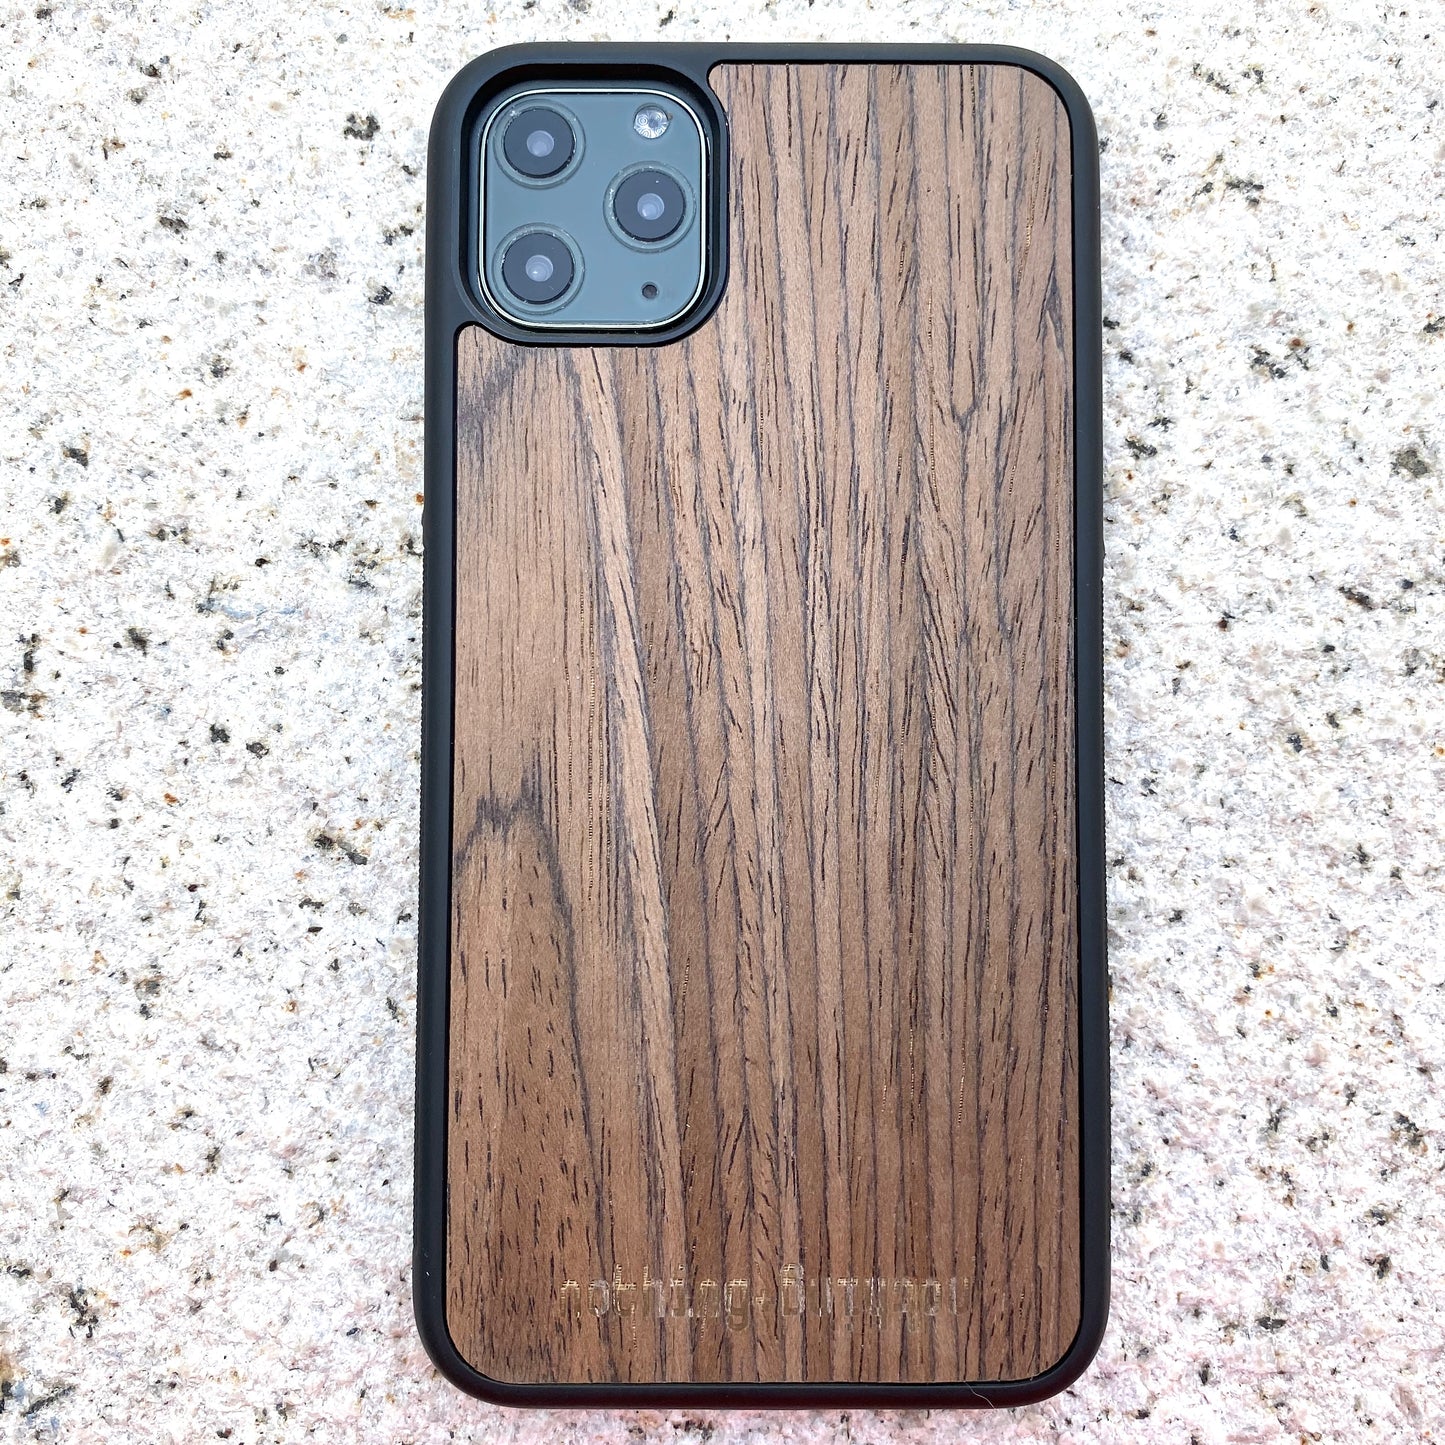 IPhone 11 /11 Pro /11 Pro Max (BROWN)